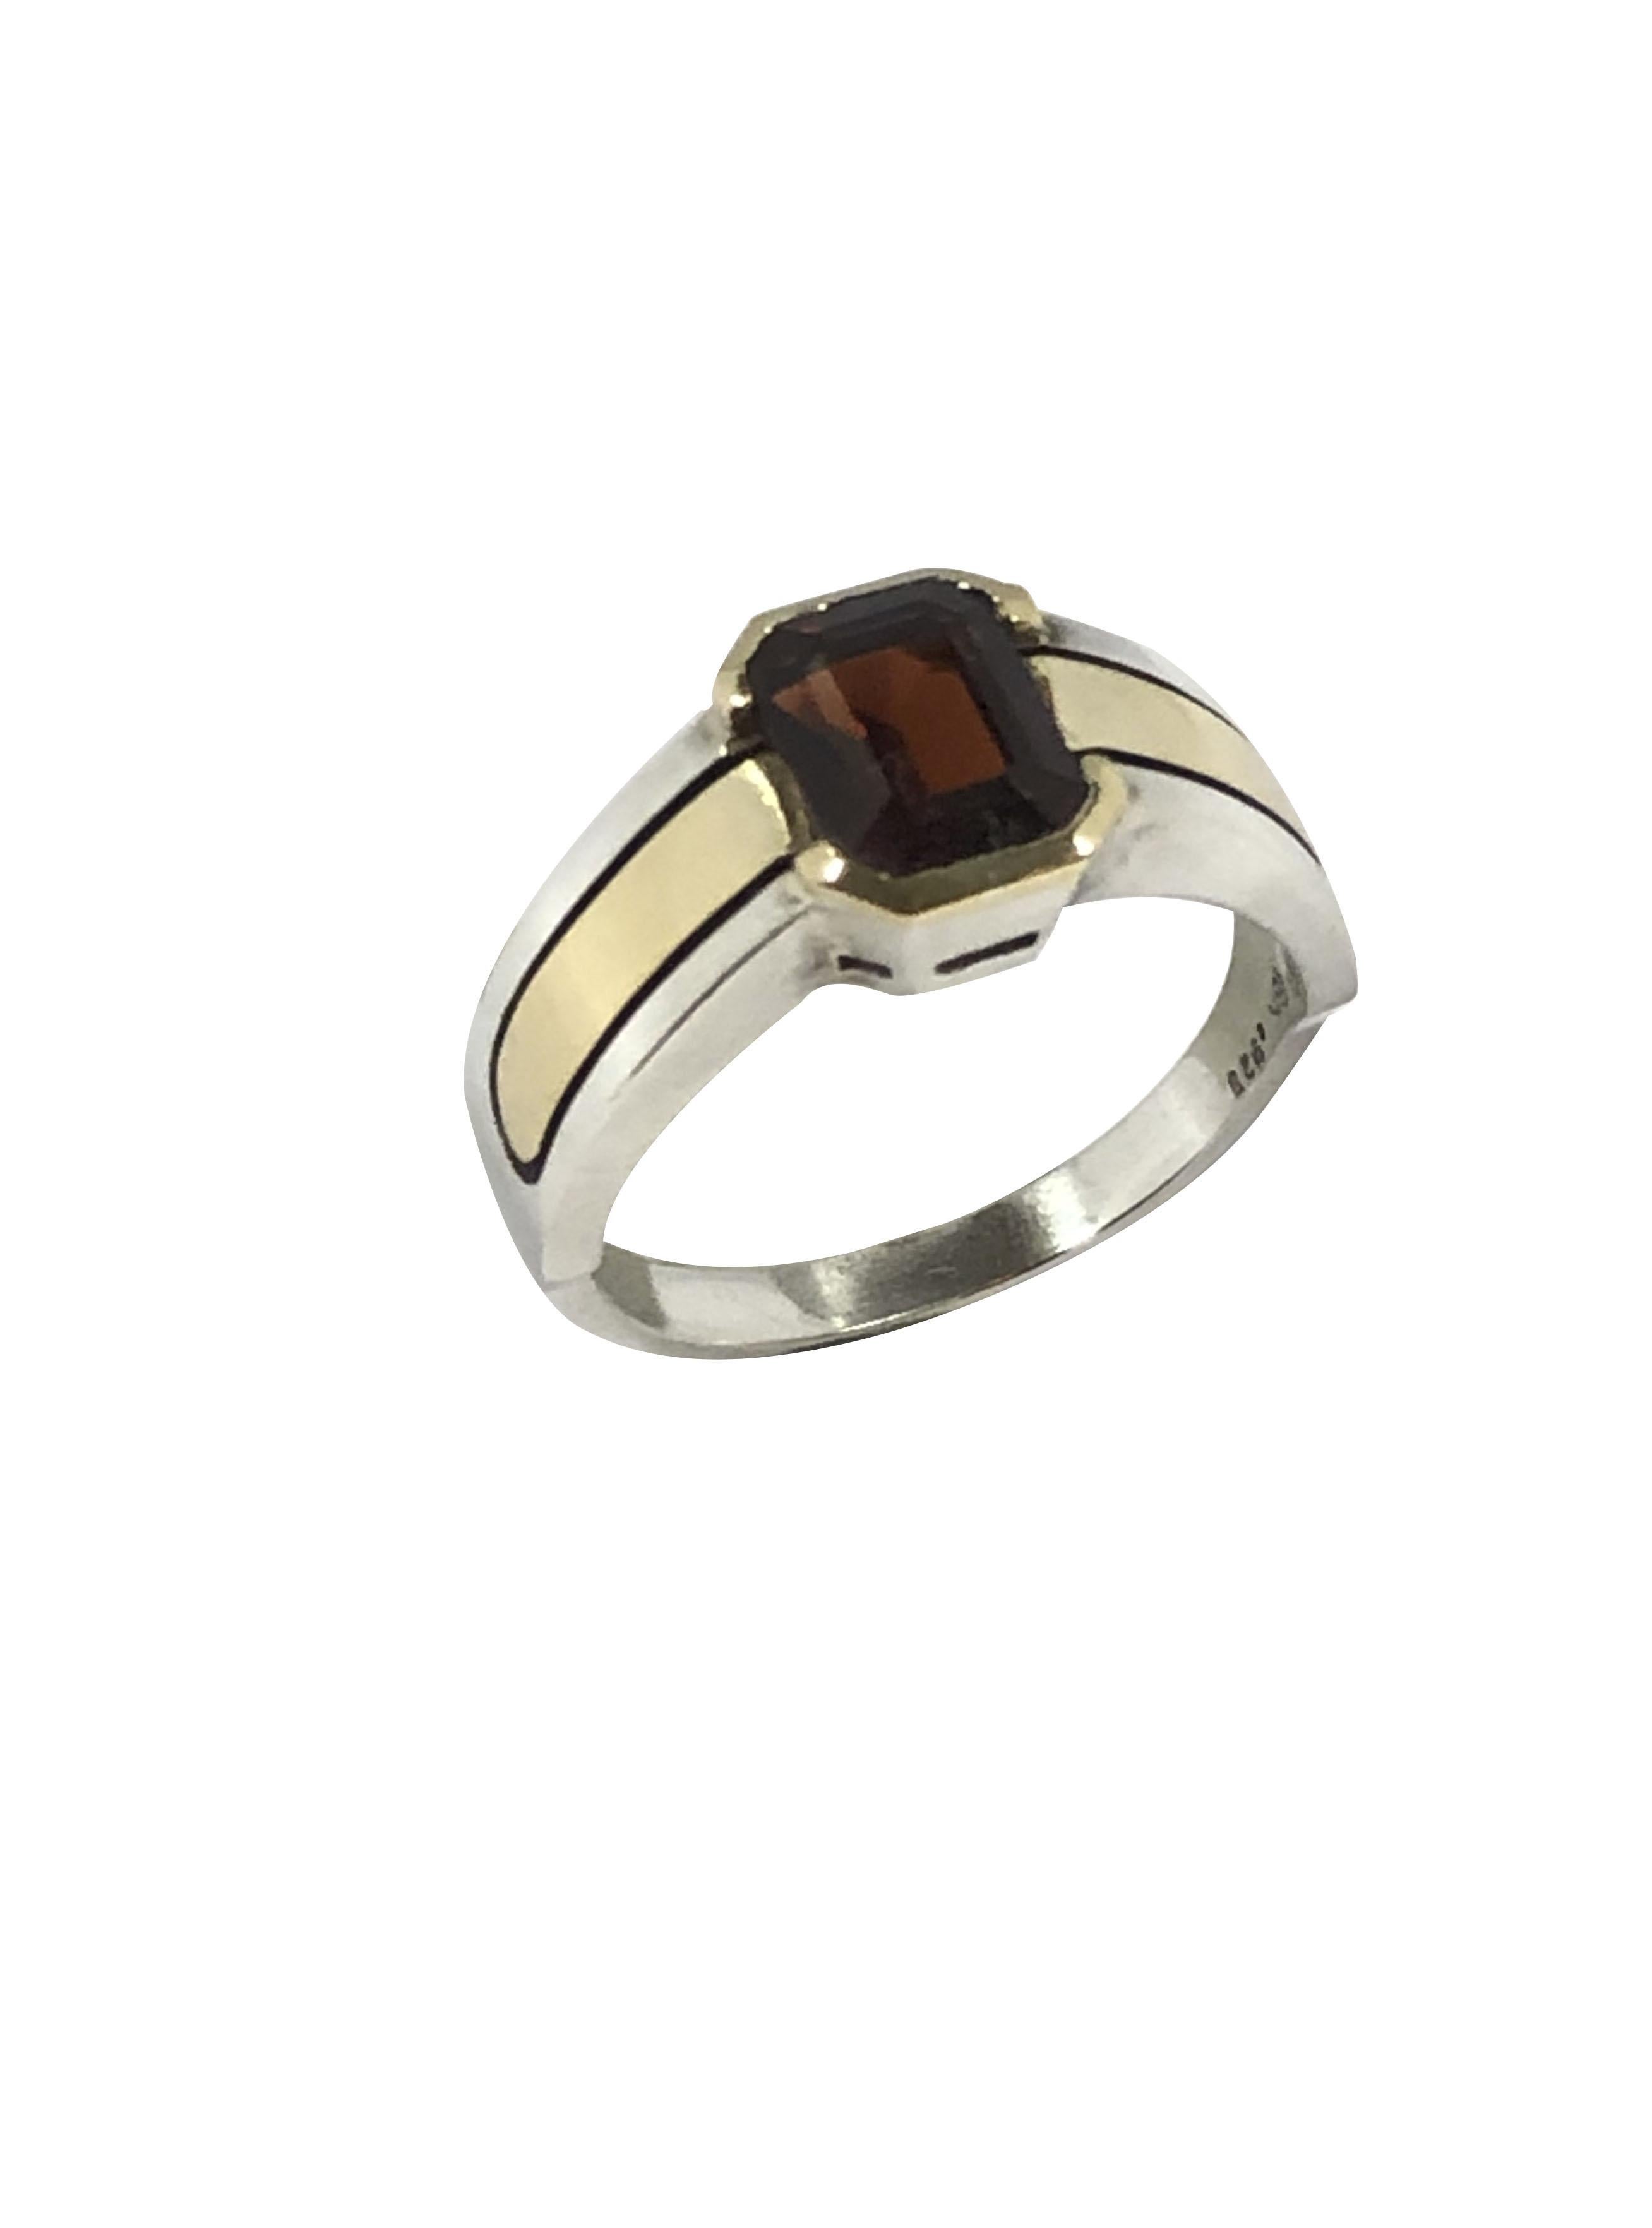 Circa 1970s Cartier 18k Yellow Gold and .925 Sterling Silver Ring, Set with a Fine Color Rectangle step cut Garnet approximately 1.50 Carat, finger size 7. Comes in a Cartier presentation Box. 